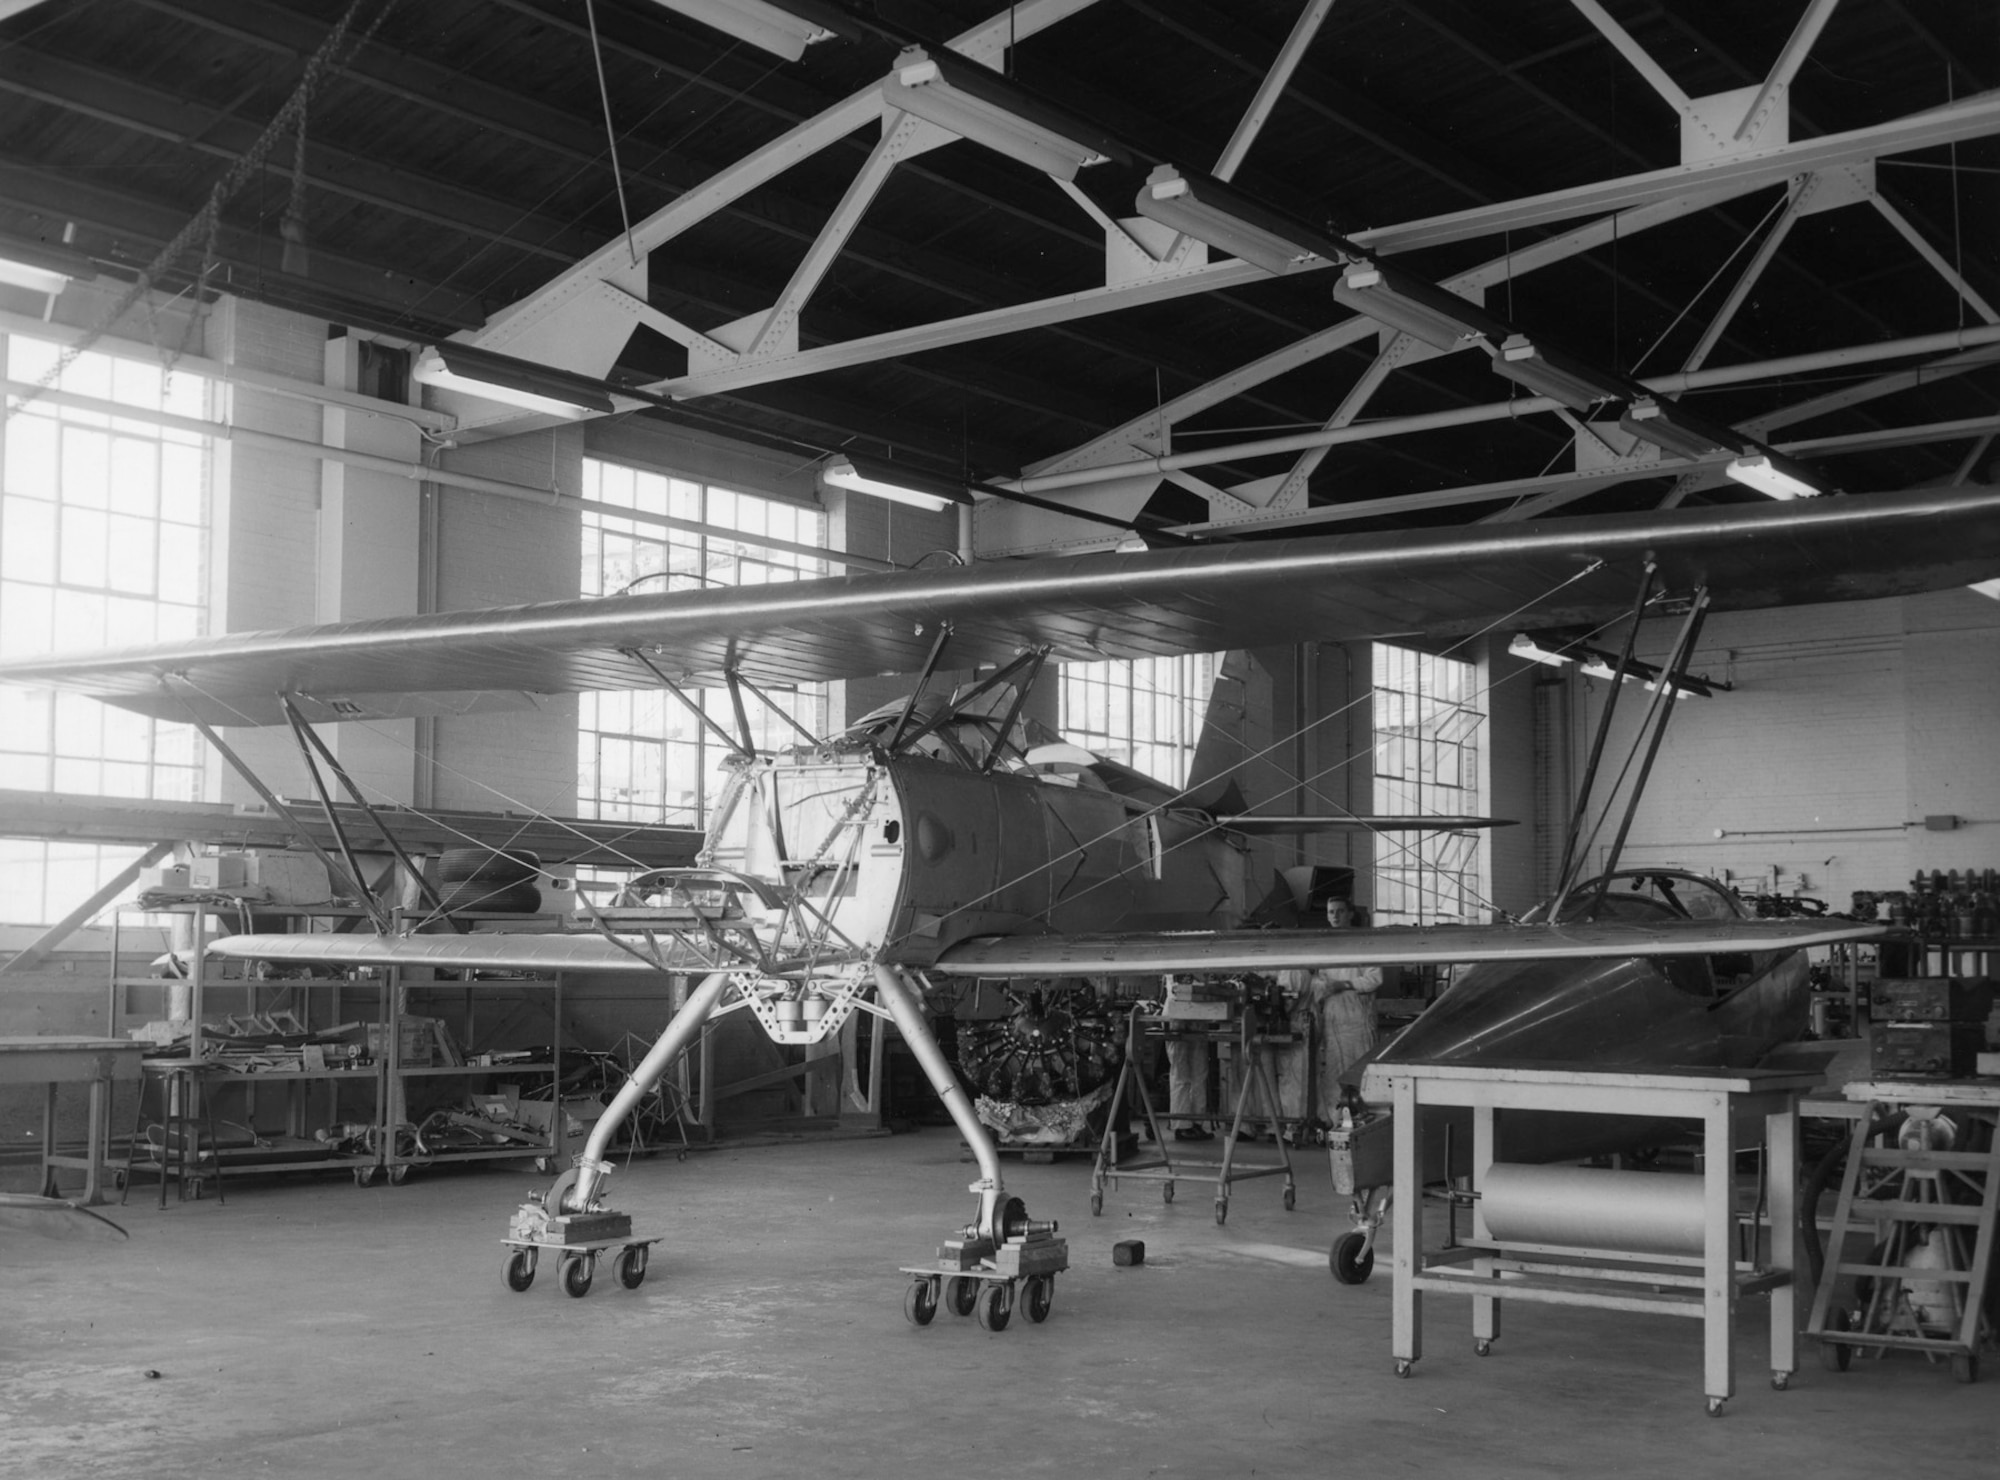 The museum's P-6E airframe was restored by the Department of Aviation Technology at Purdue University in 1963. (U.S. Air Force photo)